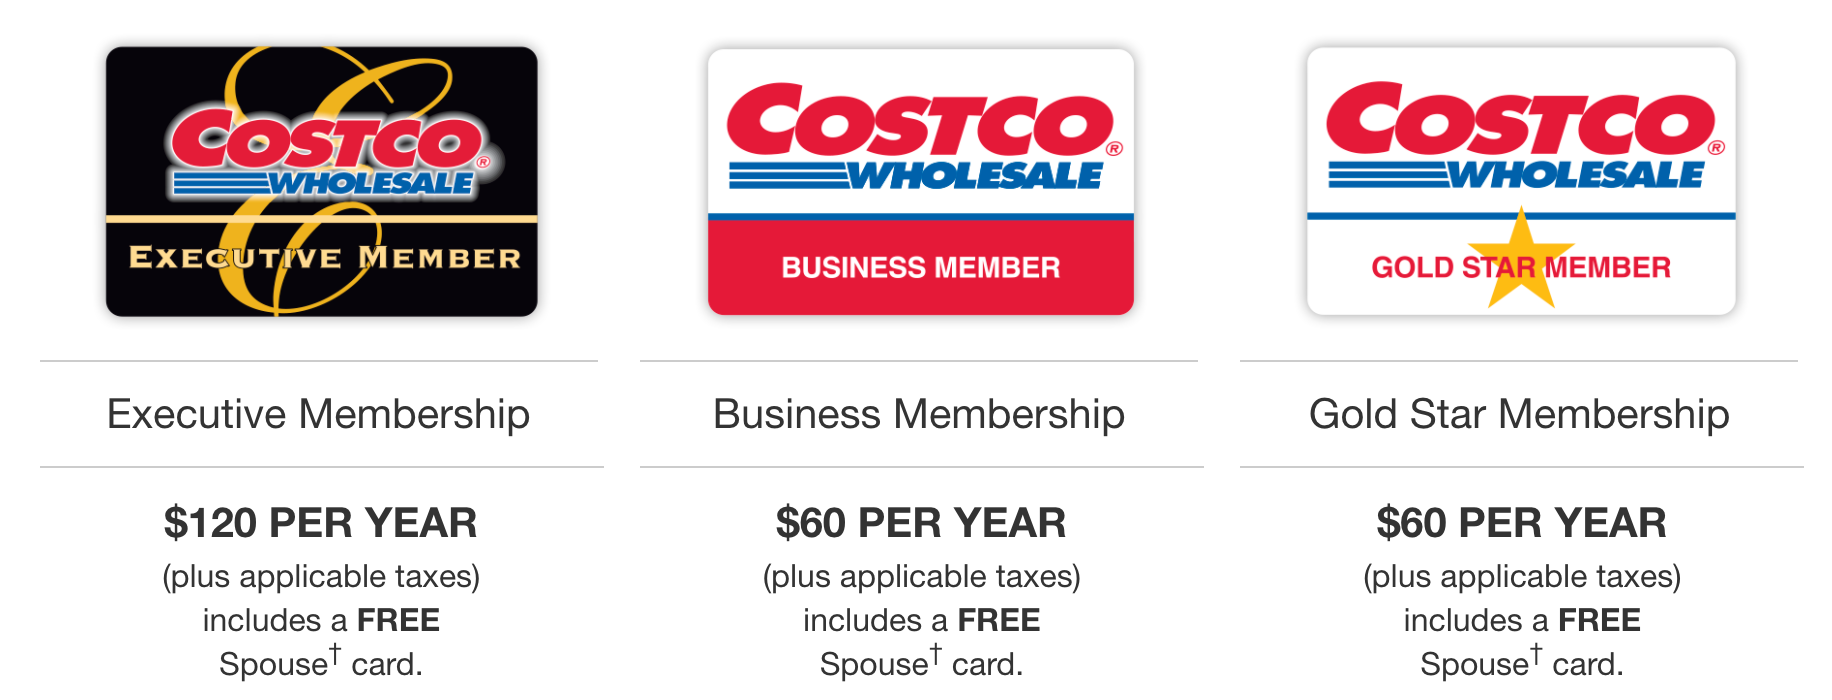 costco-canada-deal-free-20-gift-voucher-with-any-new-membership